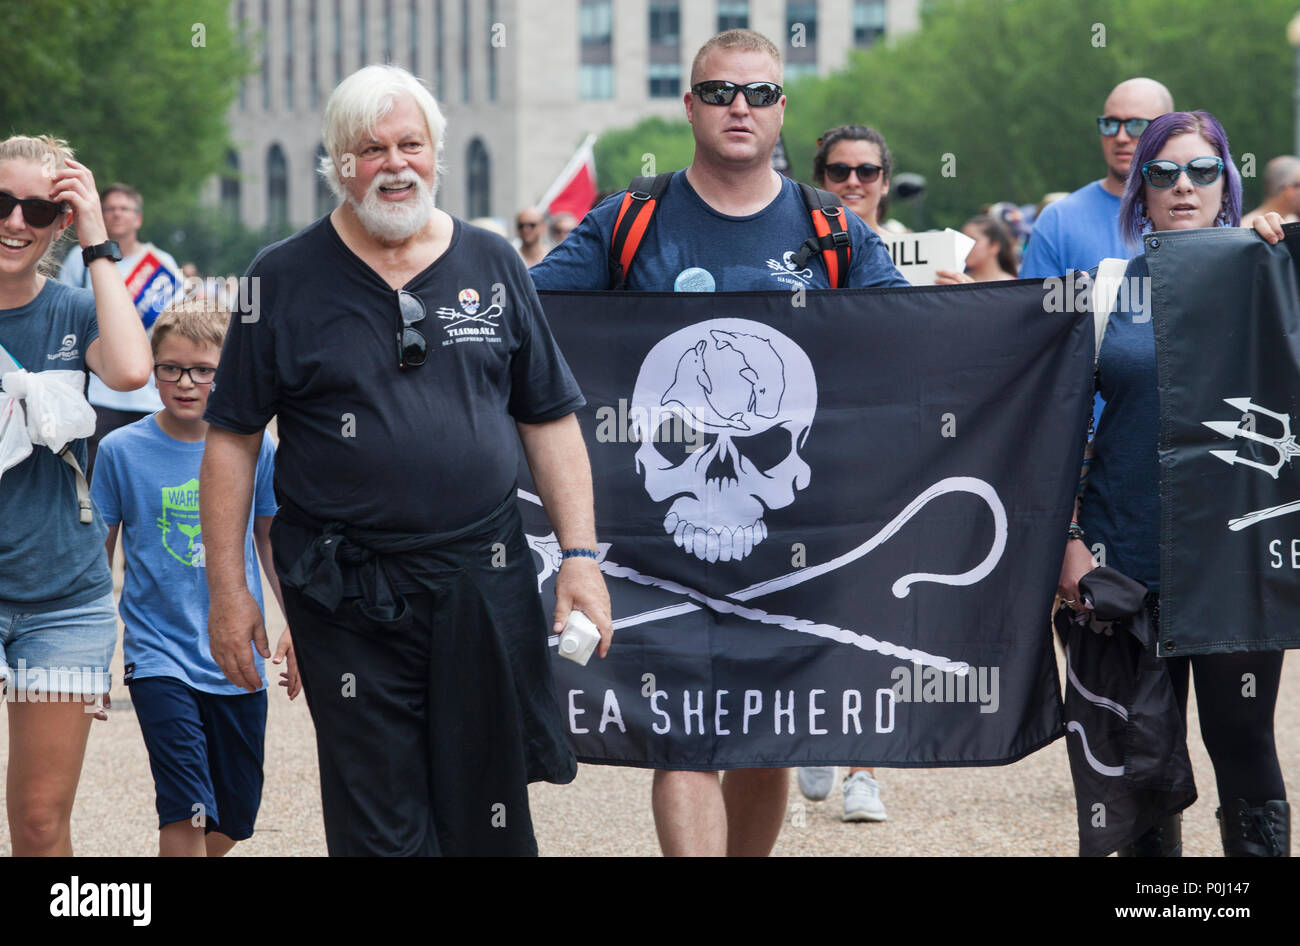 Watson, left, founder of Sea Shepherd, marches with supporters on the March For The Ocean in Washington, D.C., June 9, 2018. The inaugural March for the Ocean called attention to ocean issues including plastic pollution and overfishing at events in the U.S. Capital and around the United States.. Credit: Robert Meyers/Alamy Live News Stock Photo